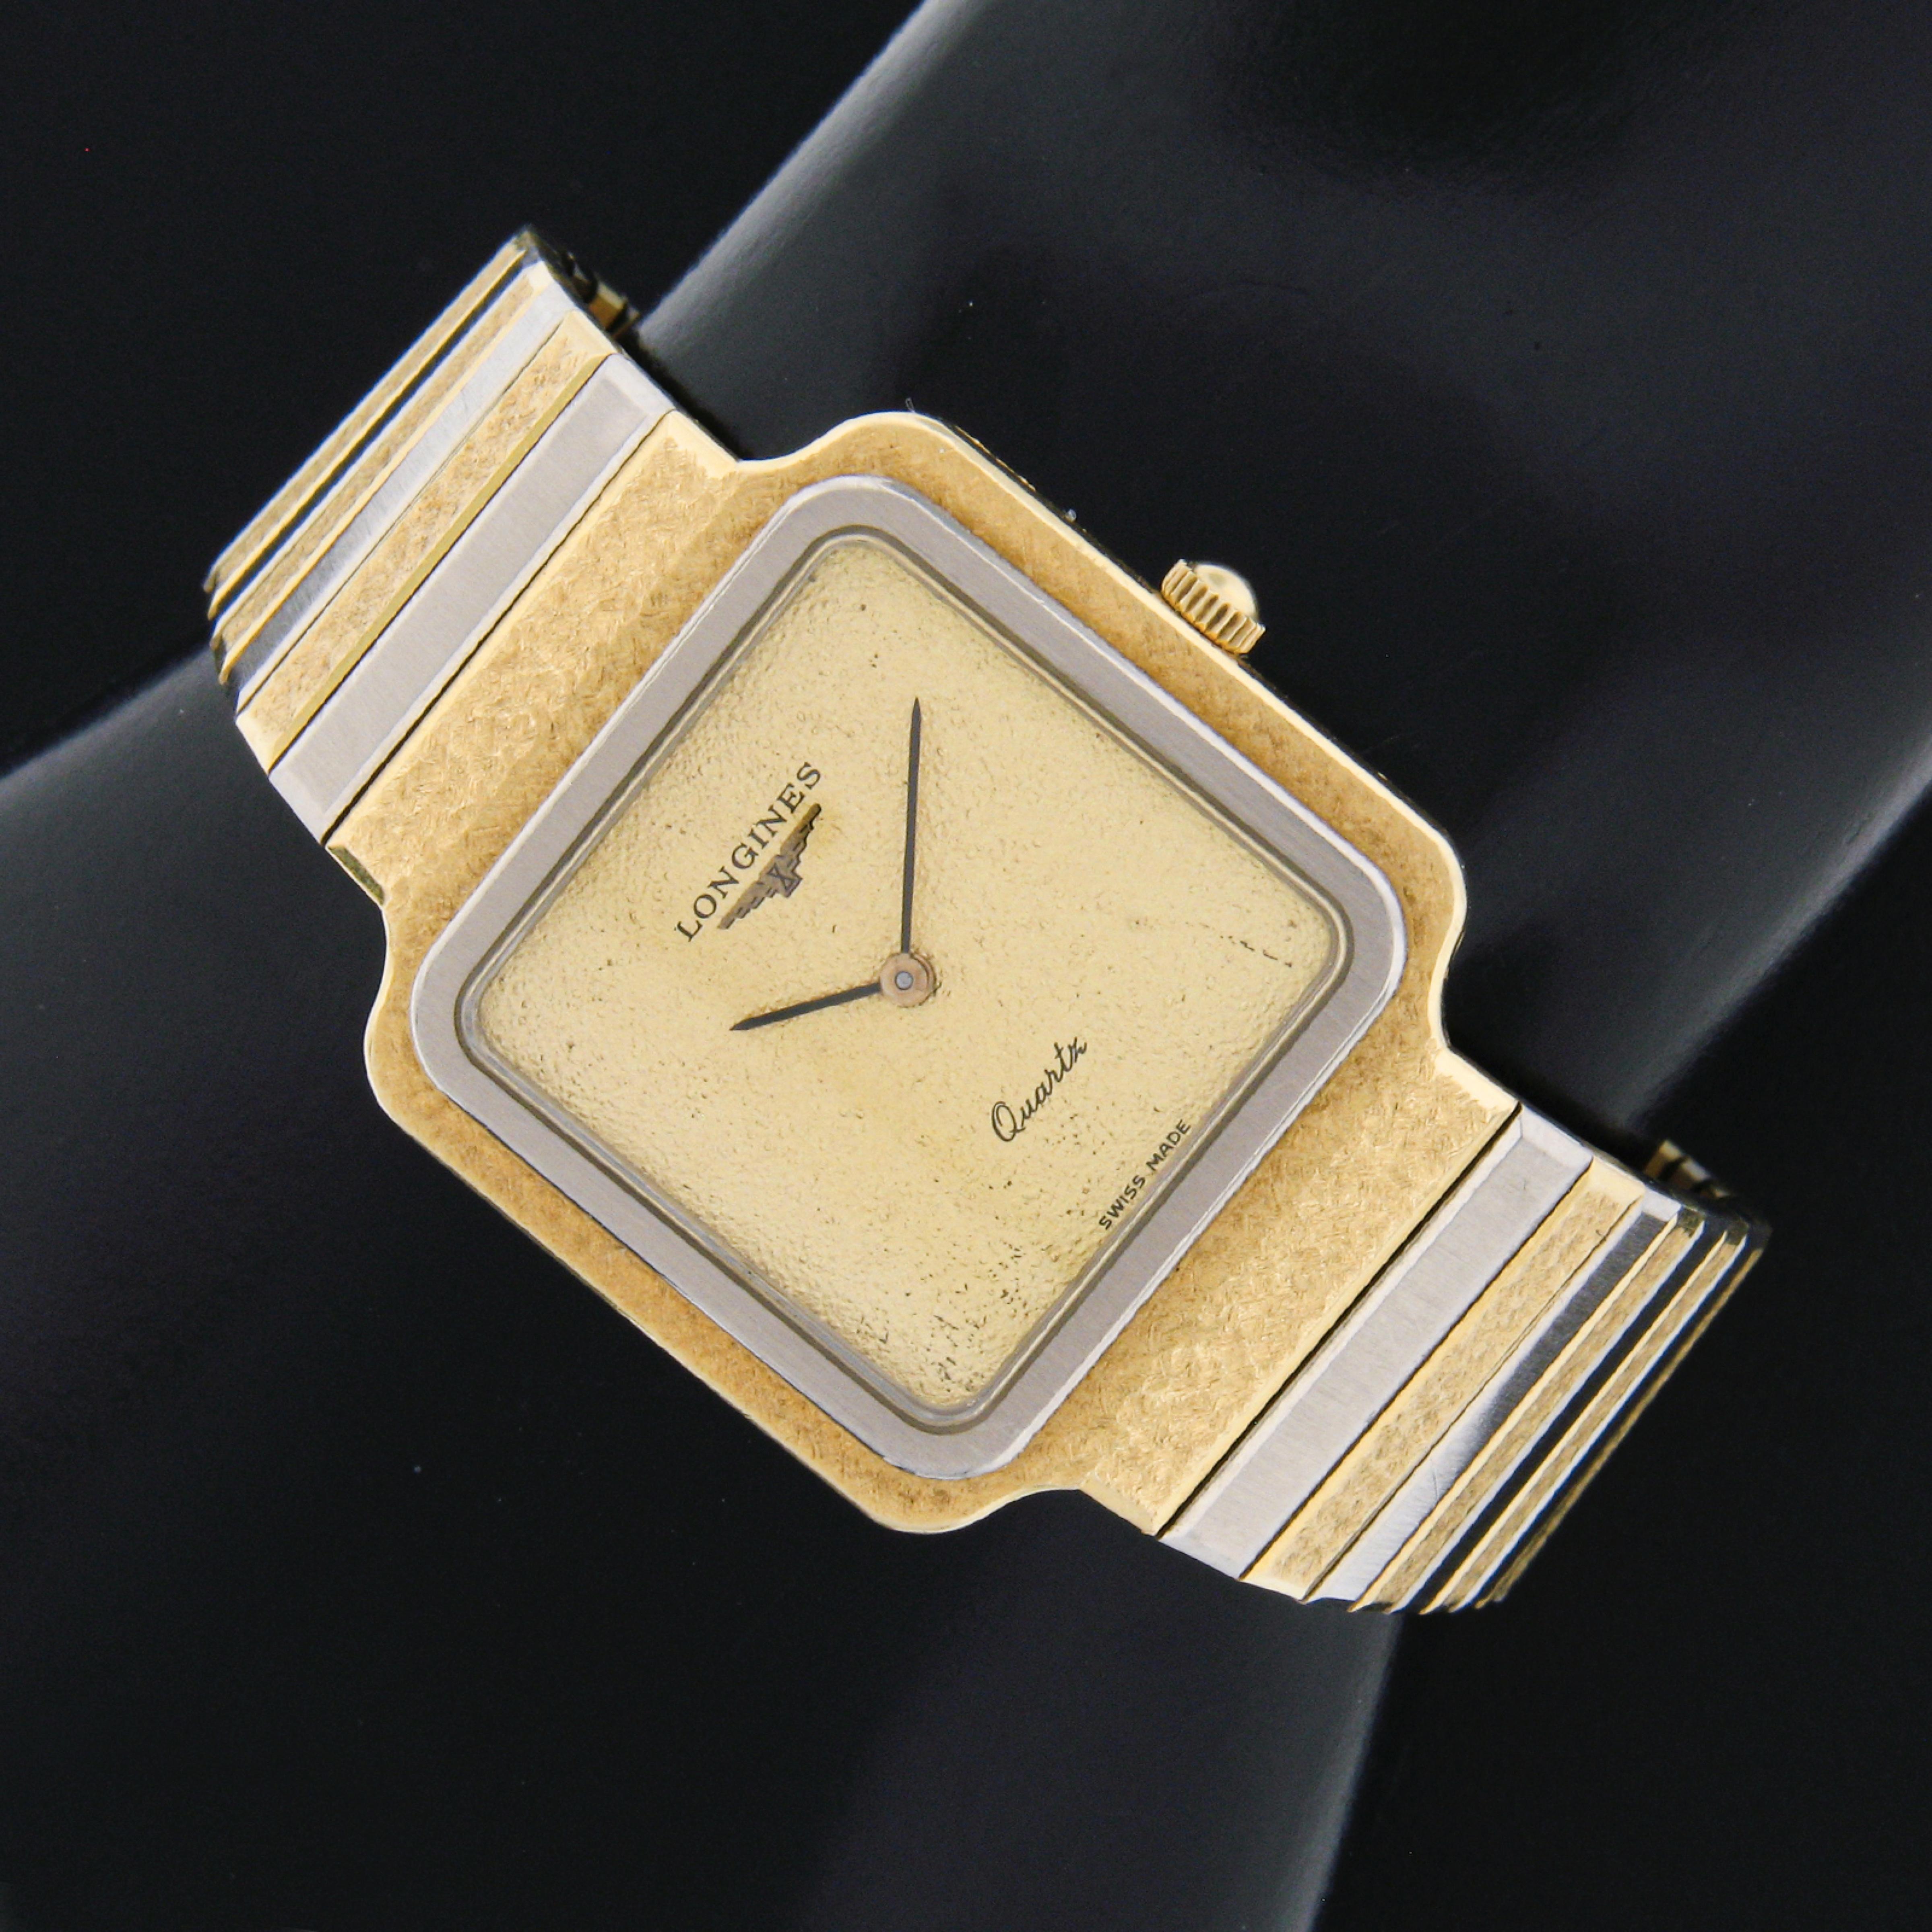 longines gold medal watch